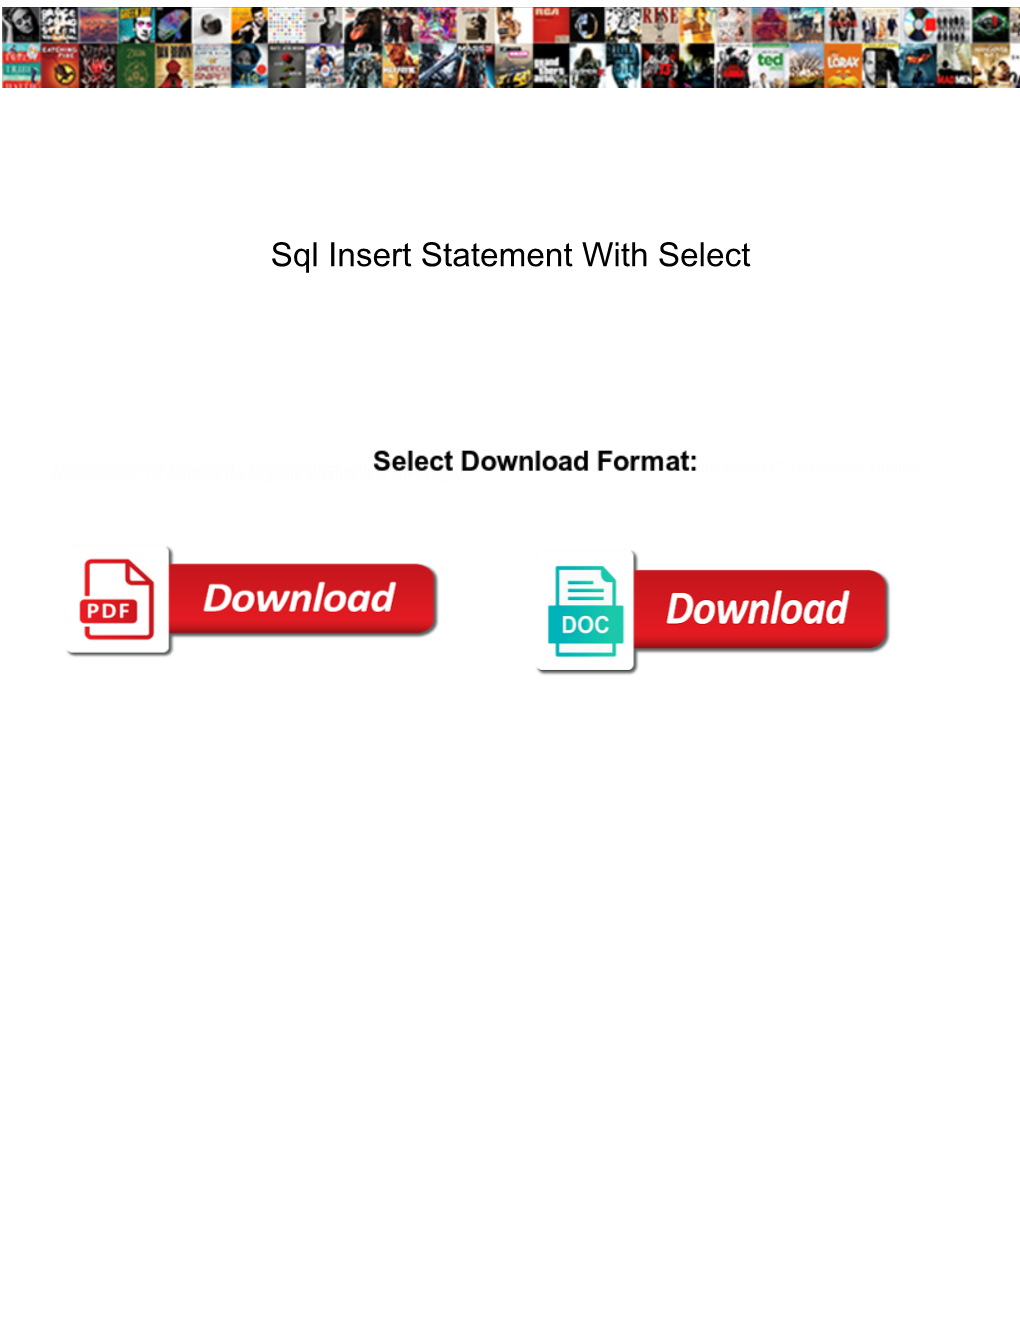 Sql Insert Statement with Select